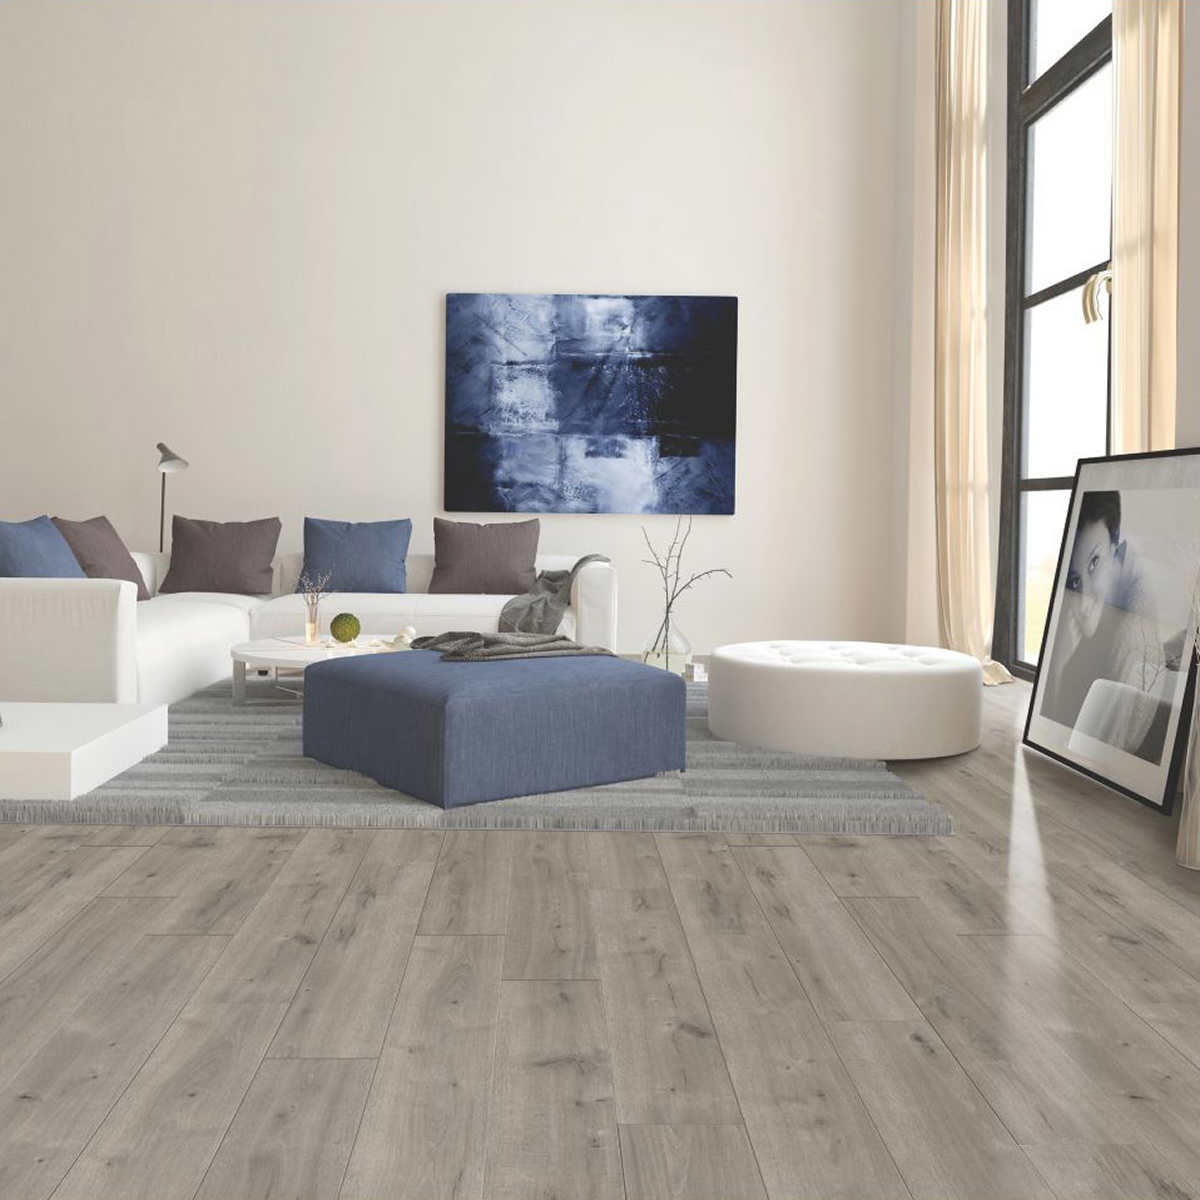 Mohawk Home Misty Harbor Oak Waterproof Rigid 5mm Thick Luxury Vinyl Plank Flooring 1mm Attached Pad Included